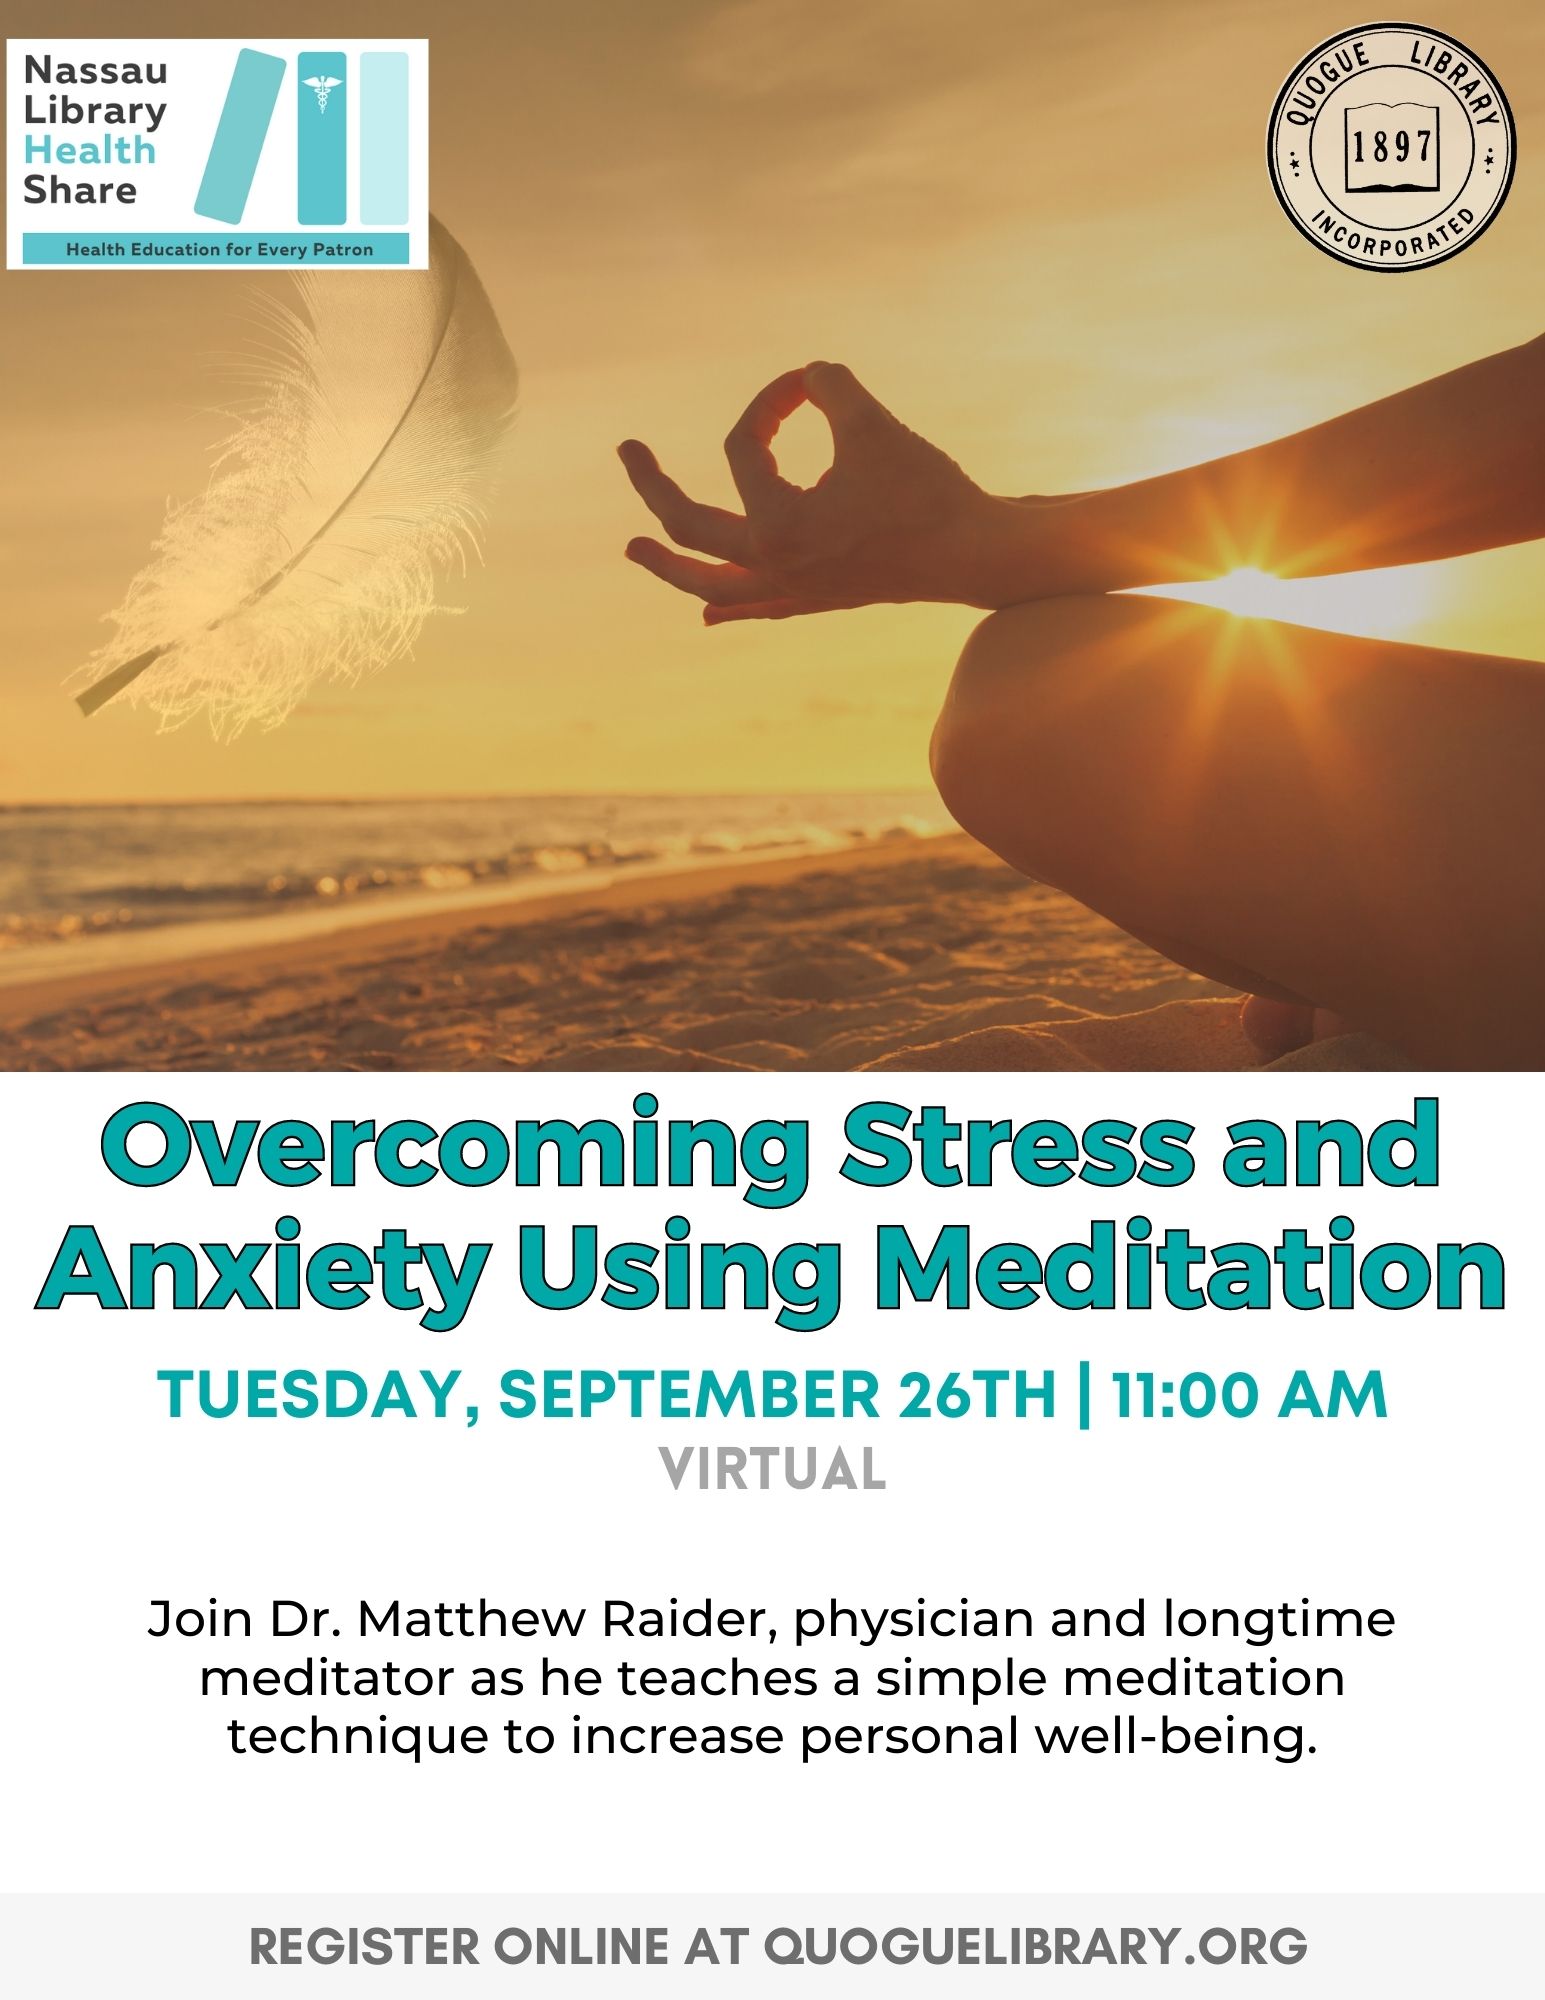 Overcoming Stress and Anxiety Using Meditation